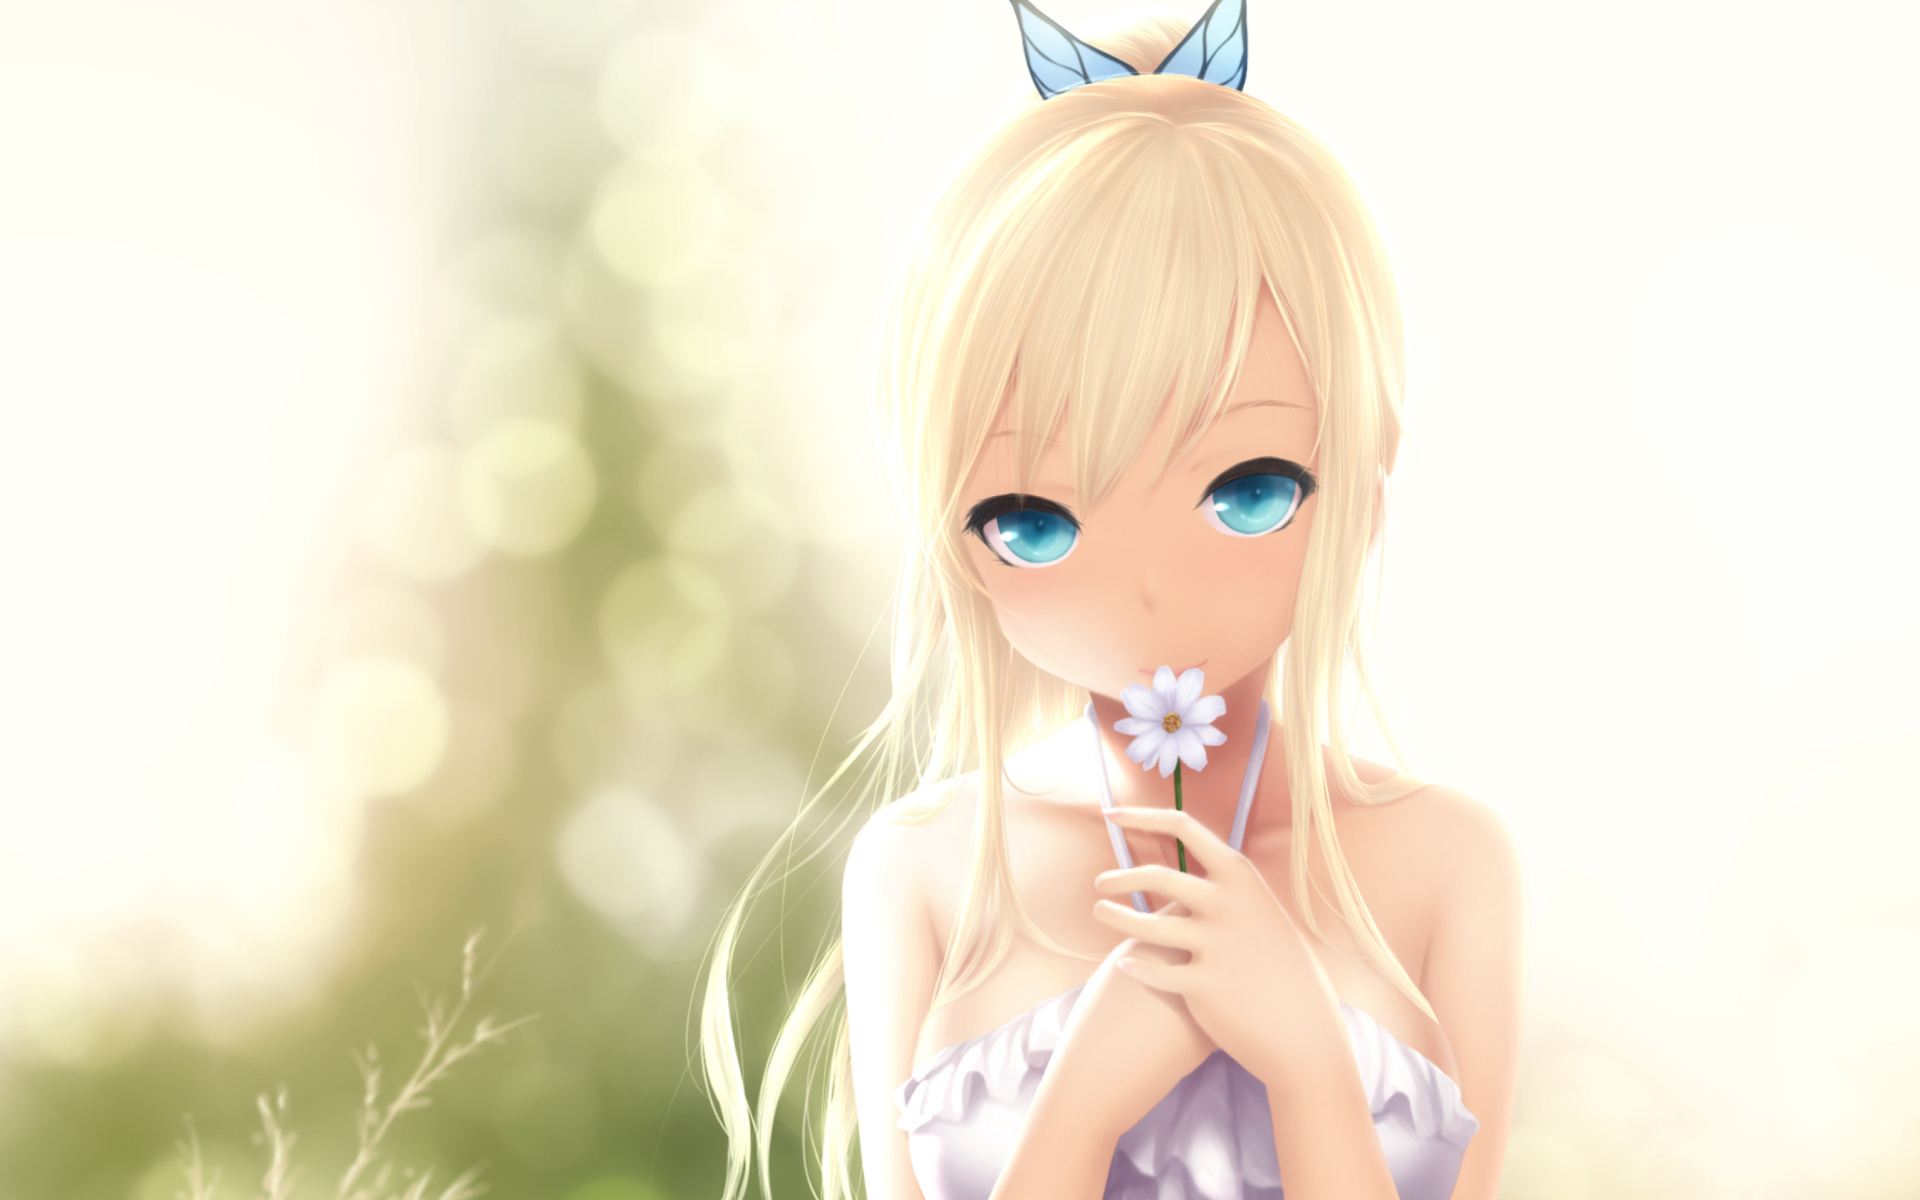 Das Anime Blonde With Daisy Wallpaper 1920x1200